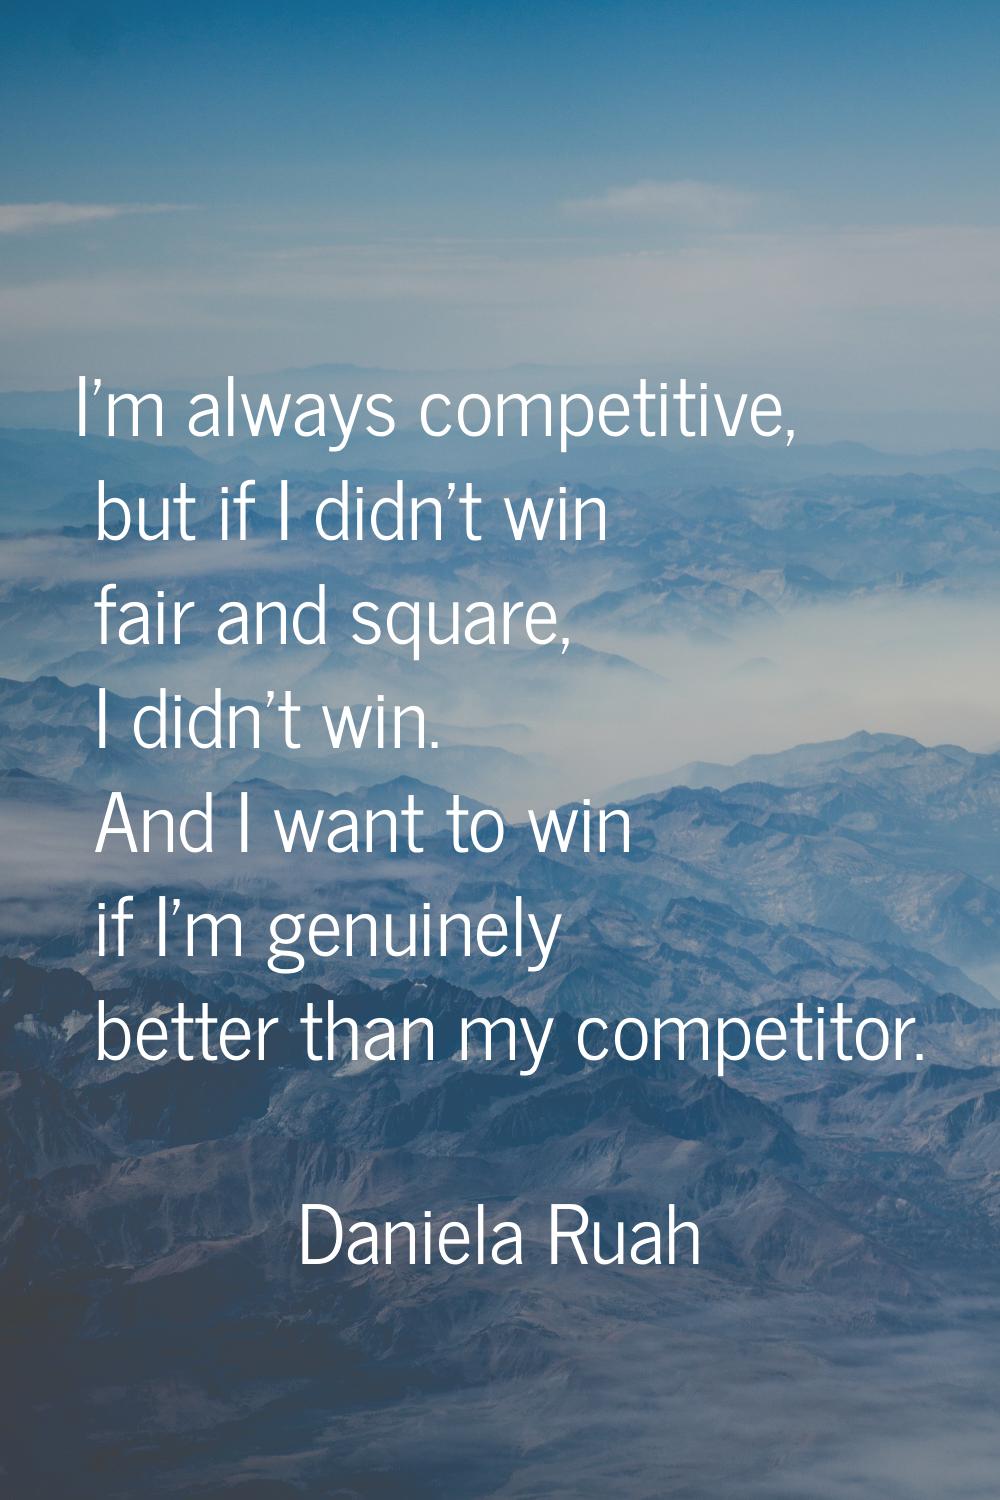 I'm always competitive, but if I didn't win fair and square, I didn't win. And I want to win if I'm